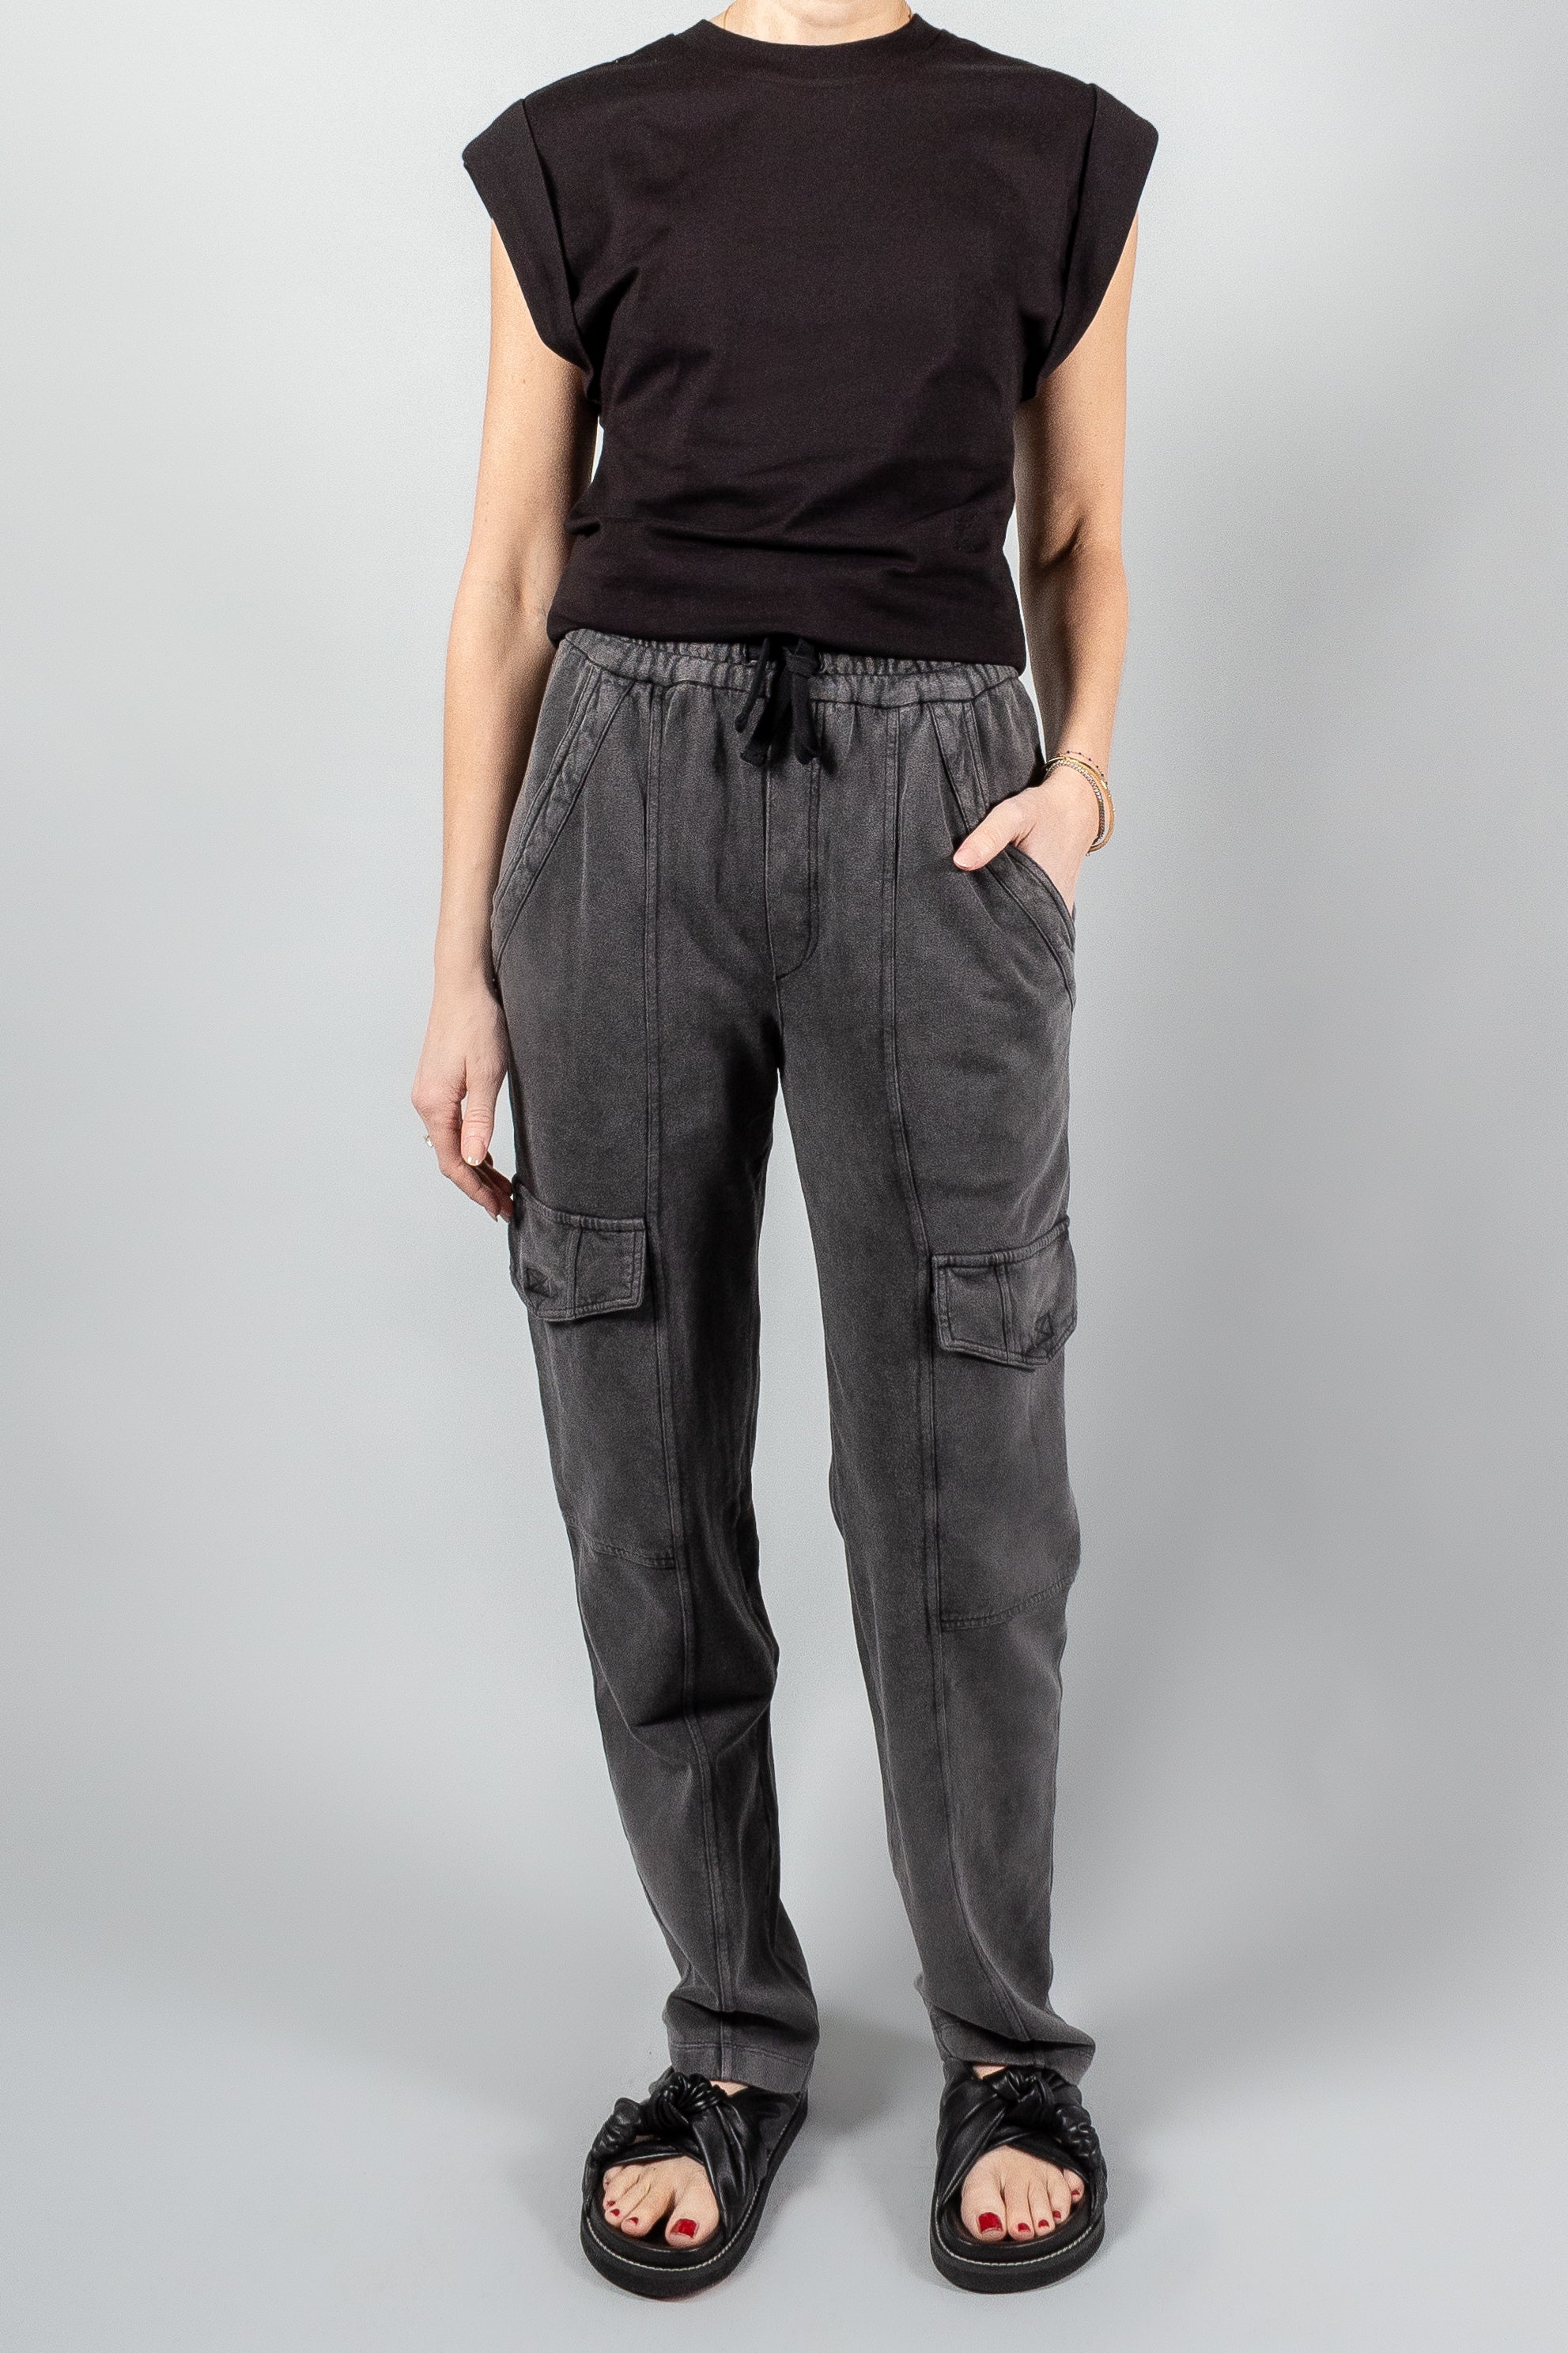 Isabel Marant Etoile Peorana Pants-Pants and Shorts-Misch-Boutique-Vancouver-Canada-misch.ca